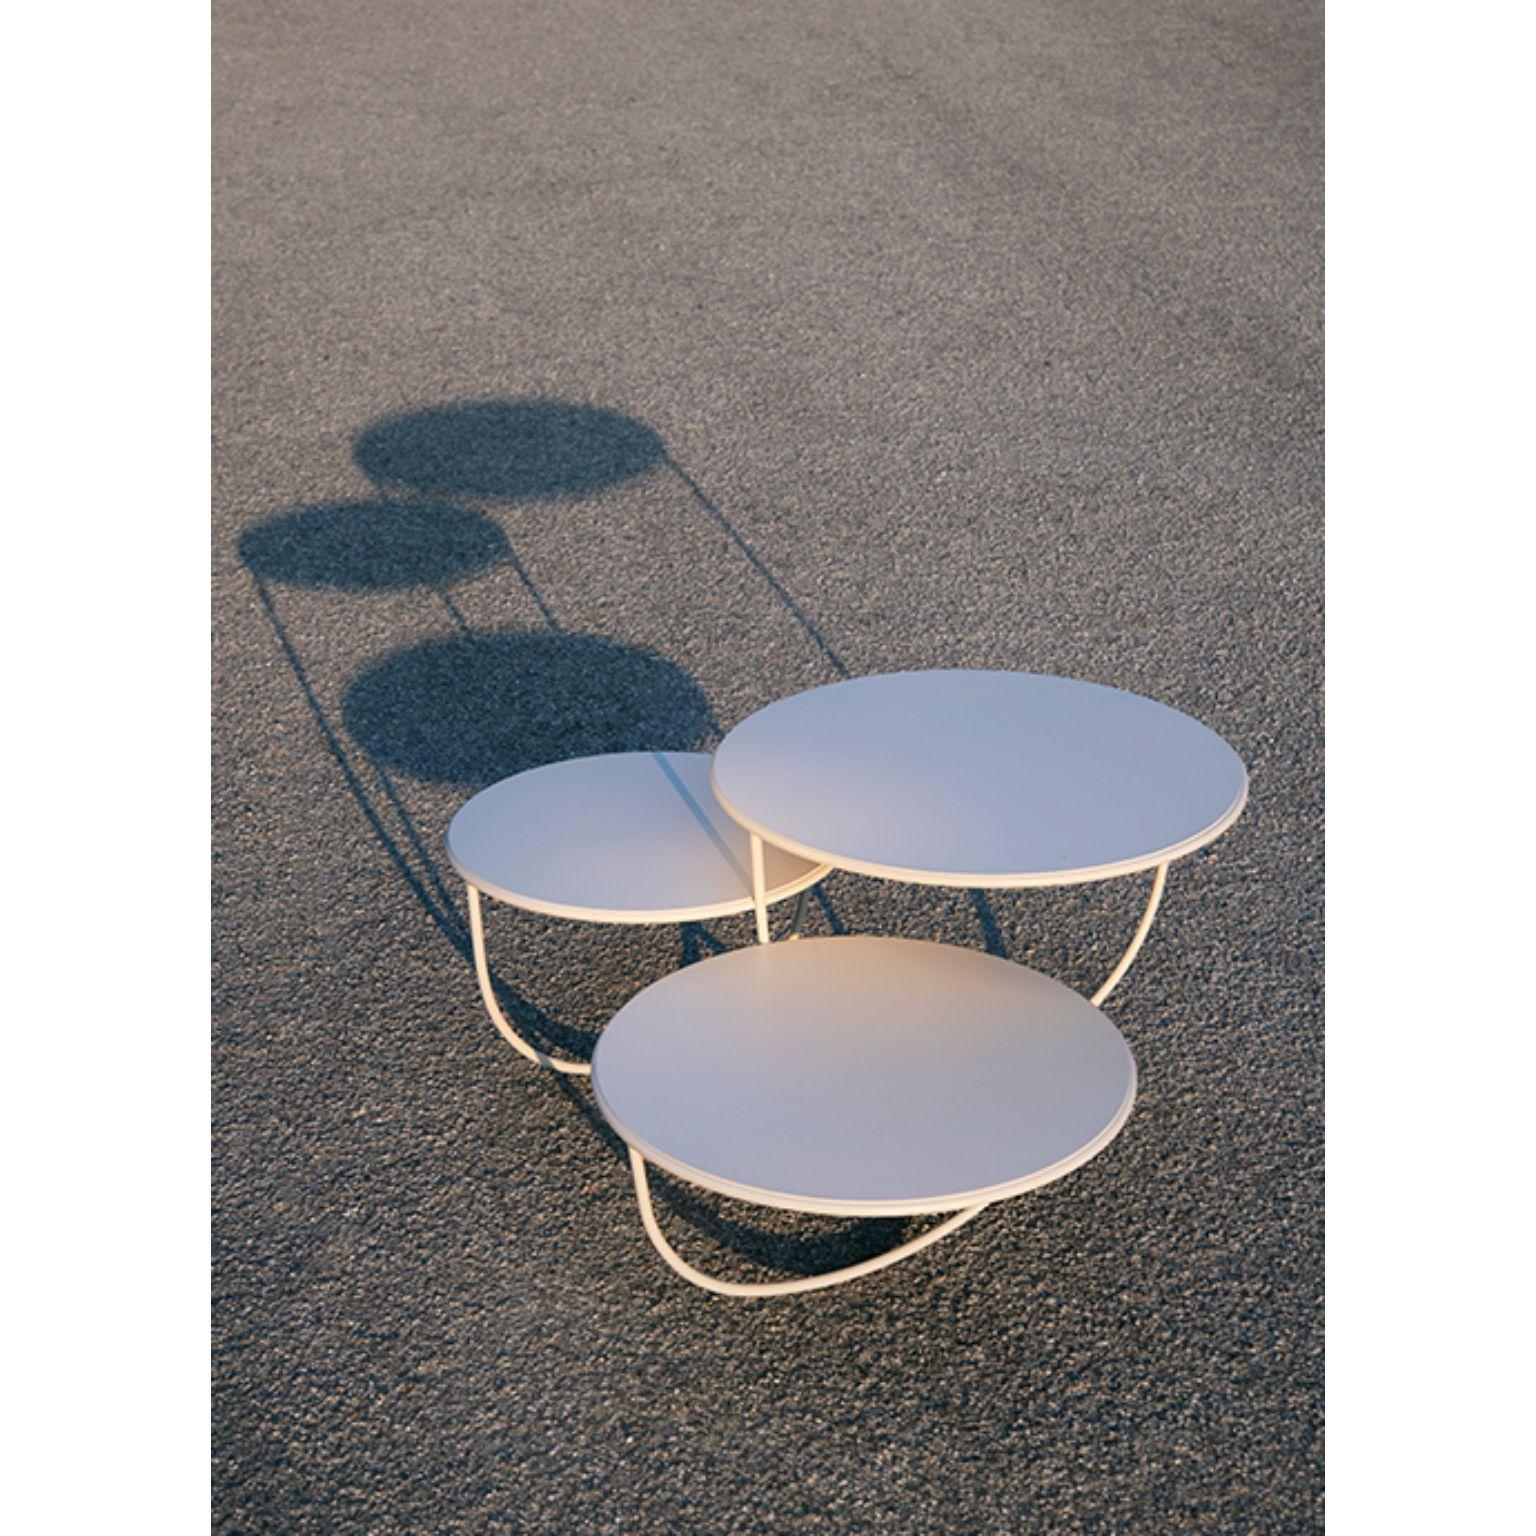 Trio side table by Nendo
Materials: Top: Noce Canaletto solid wood, glass or metal
 Structure: Black chrome metal, Black/Light grey NCS 2002 Y50R/Coral NCS 2570 Y70R /Dark 
 Green NCS 8010 B70G powder-coated metal
Dimensions: W 84.7 x D 76.3 x H